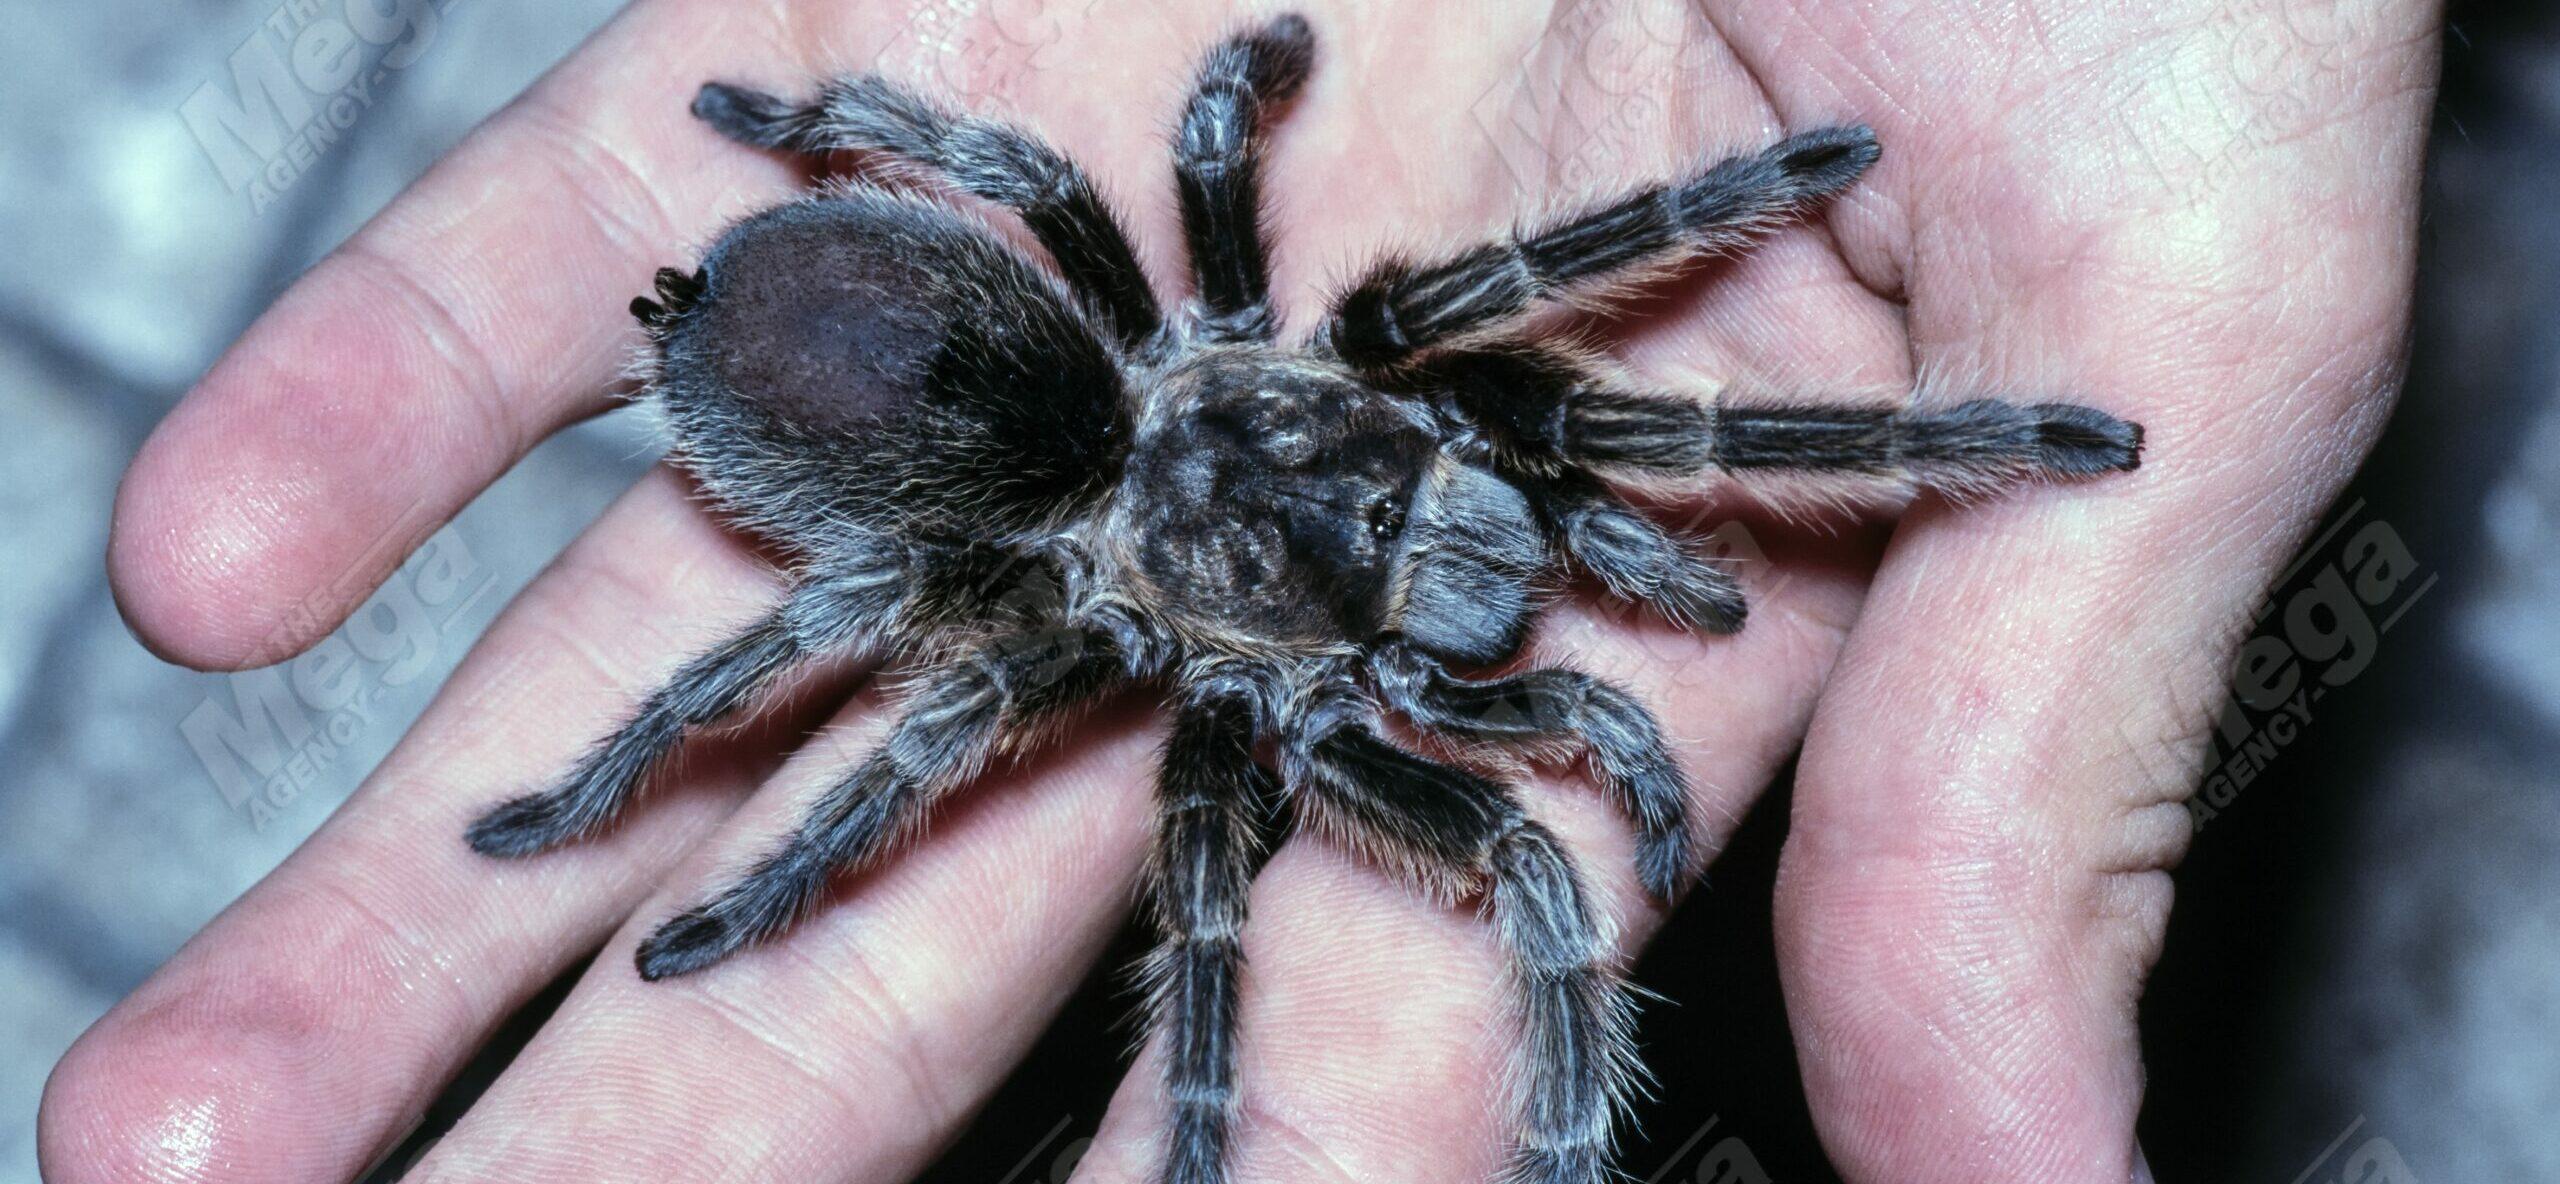 Chilean tarantula, Grammostola porteri, on top of a human hand. It is one of the